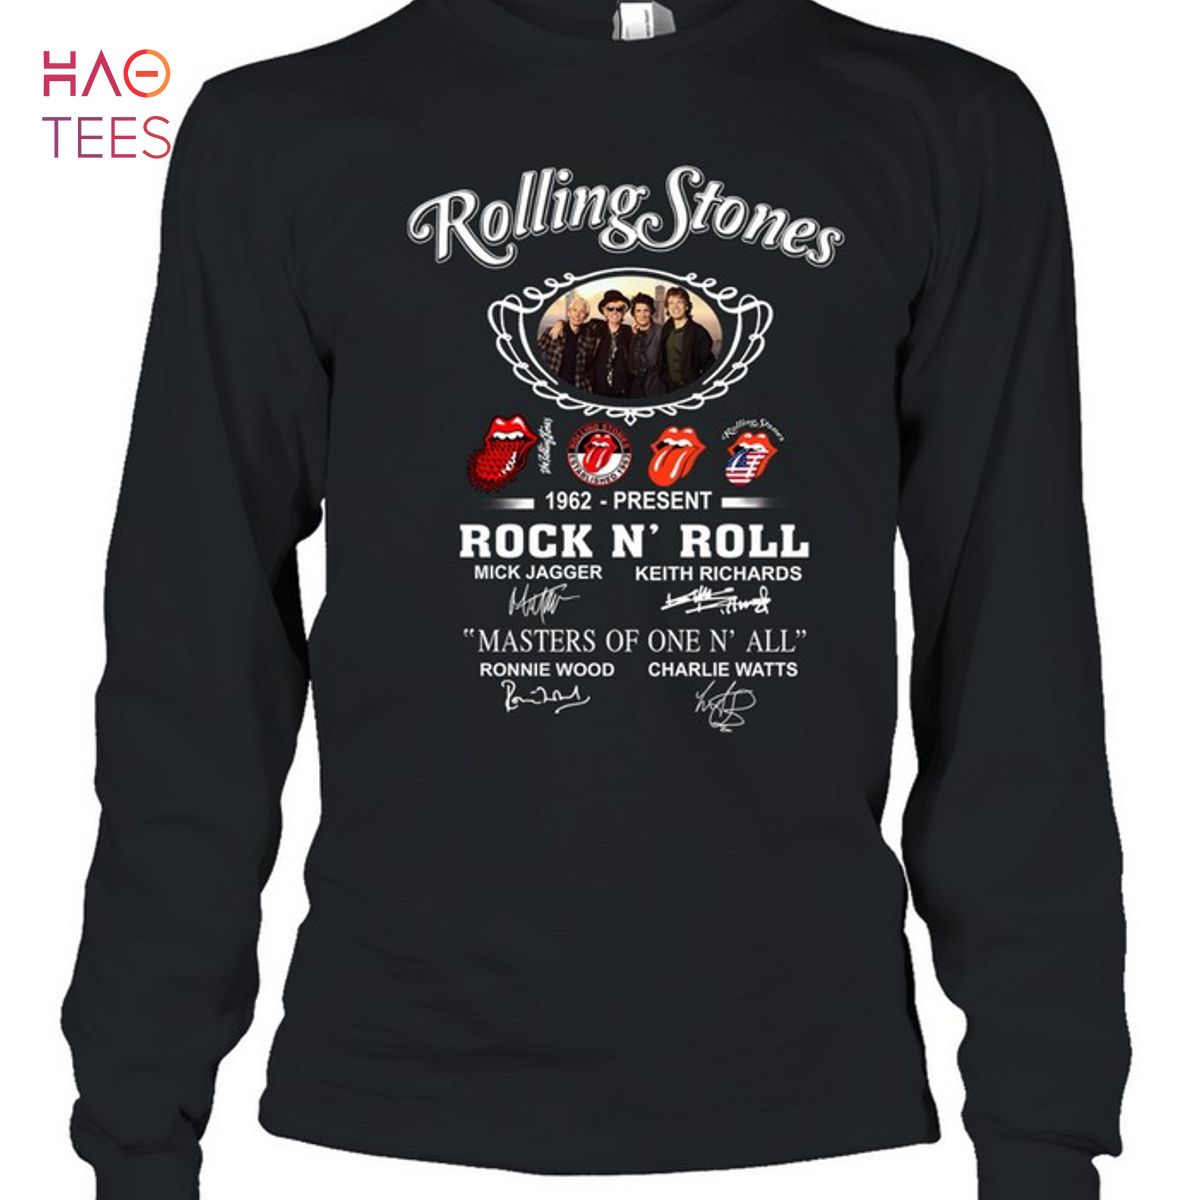 The Rolling Stones 60th Anniversary T-Shirt